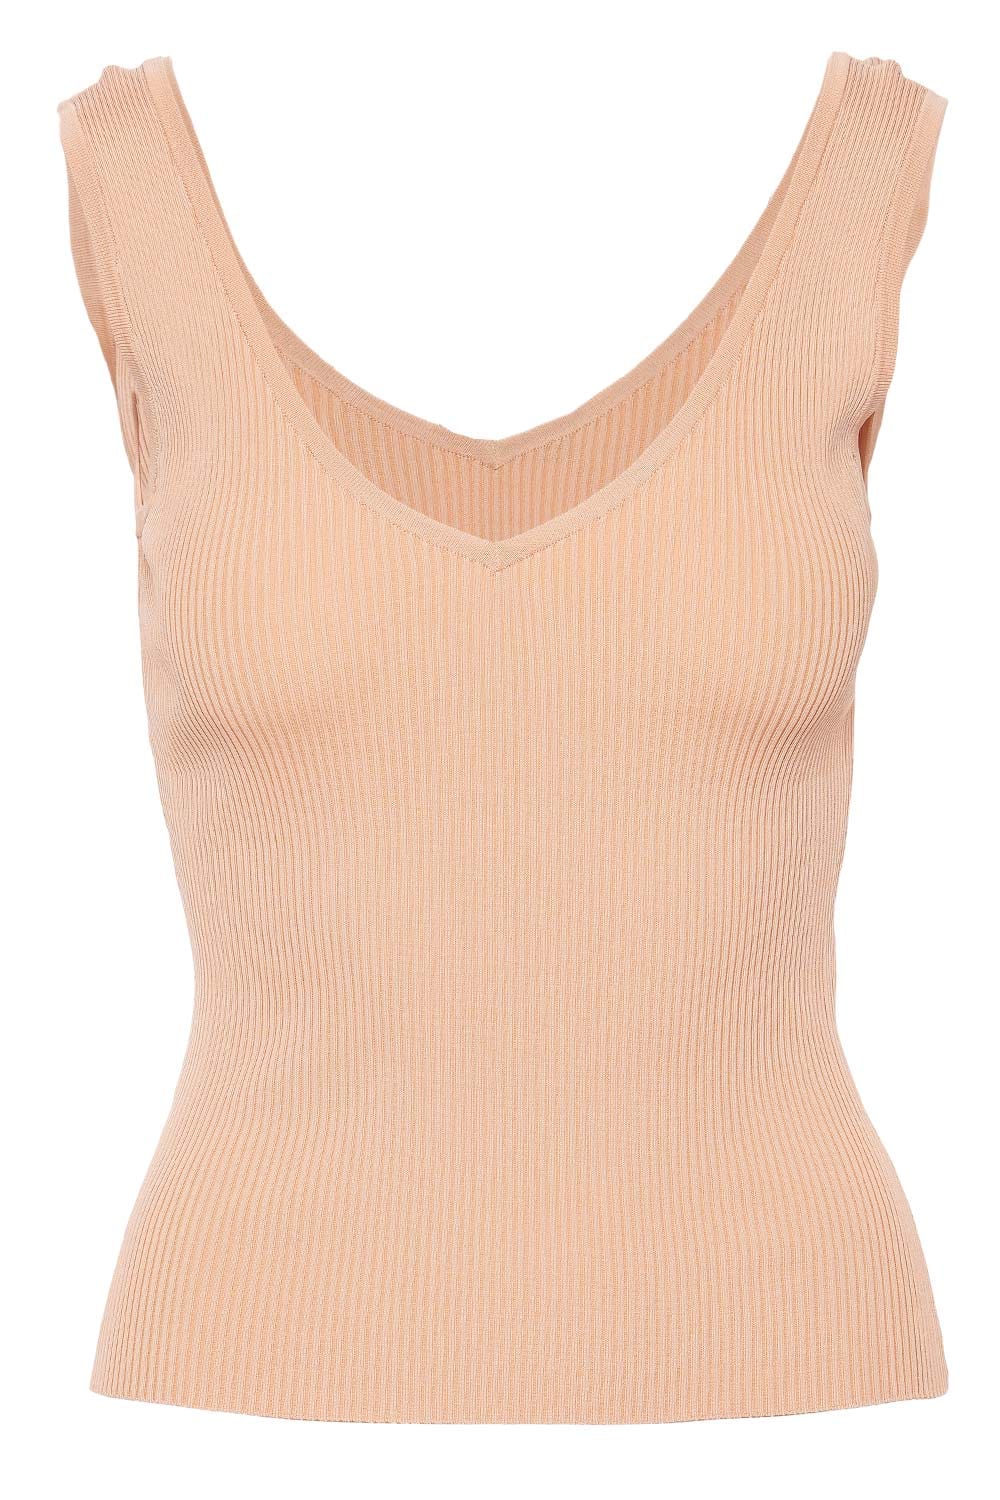 ZIMMERMANN August Biscuit Ribbed V-Neck Tank